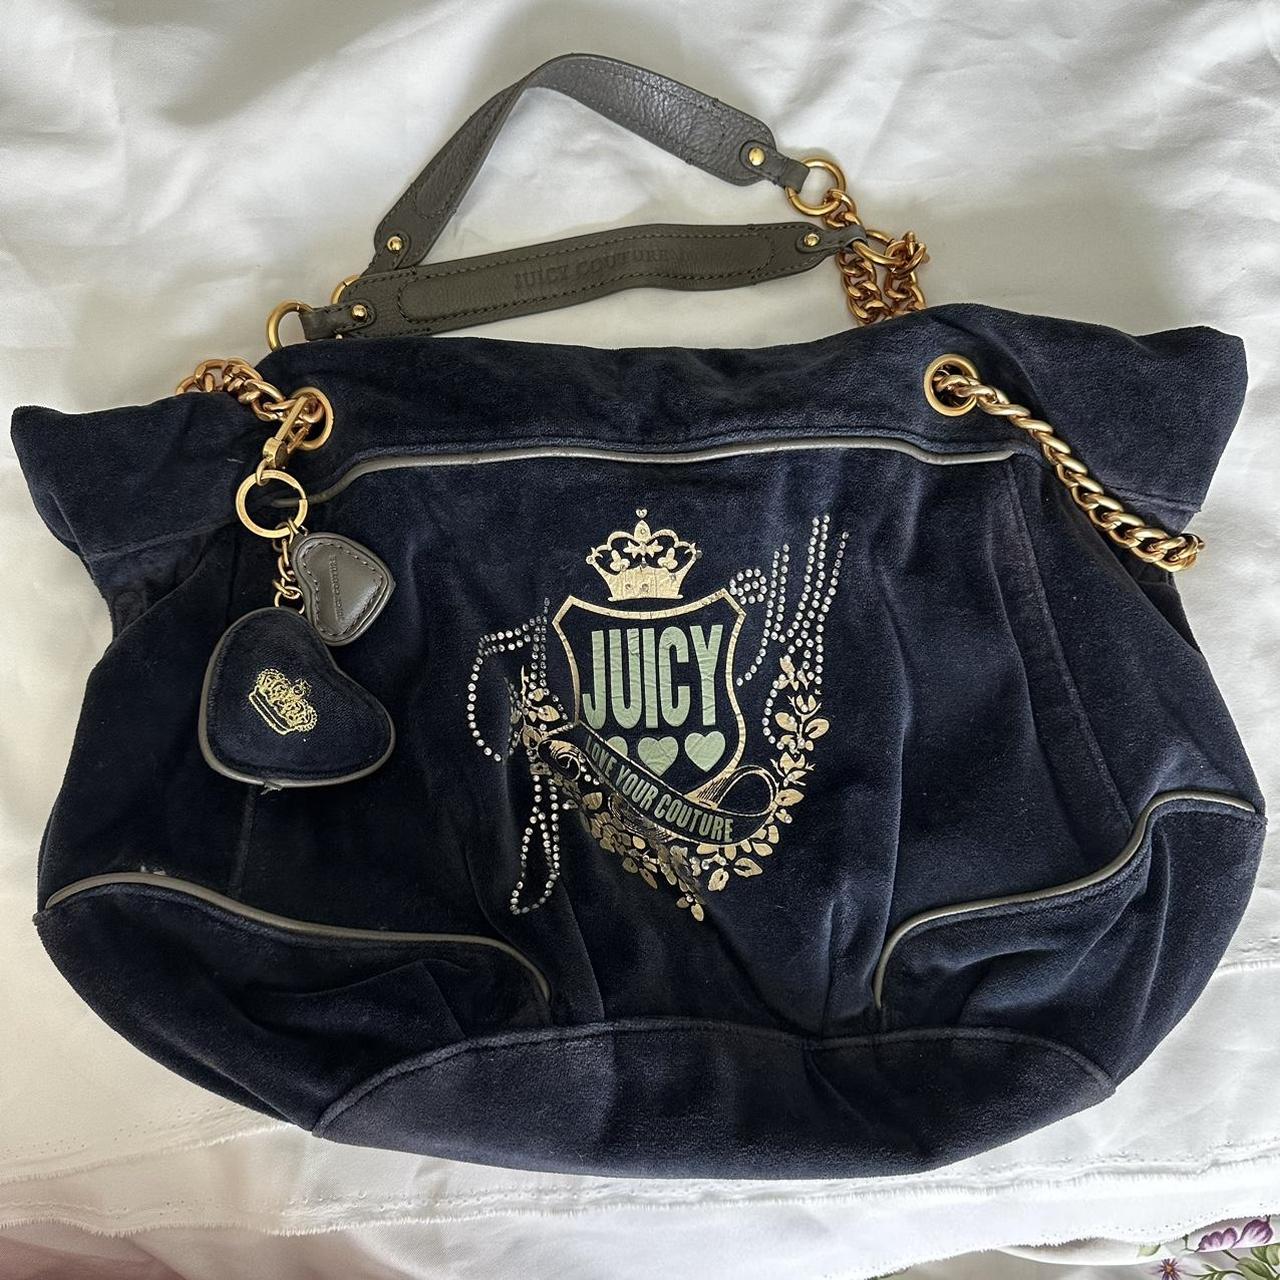 Blue moon fits perfectly in my Juicy Couture bag!! 💙🌙 : r/plushies